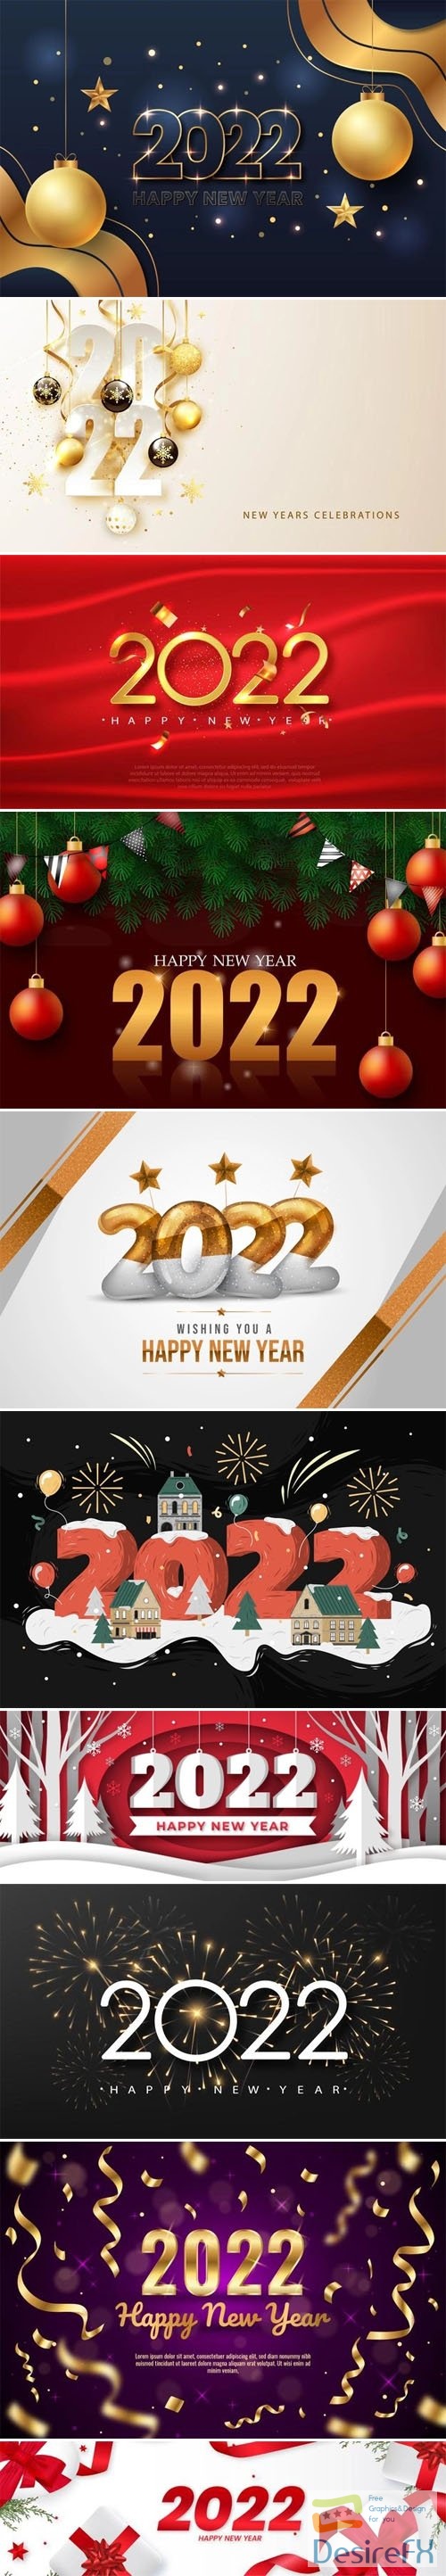 10 Happy New Year 2022 Banners &amp; Backgrounds Vector Templates Vol.2